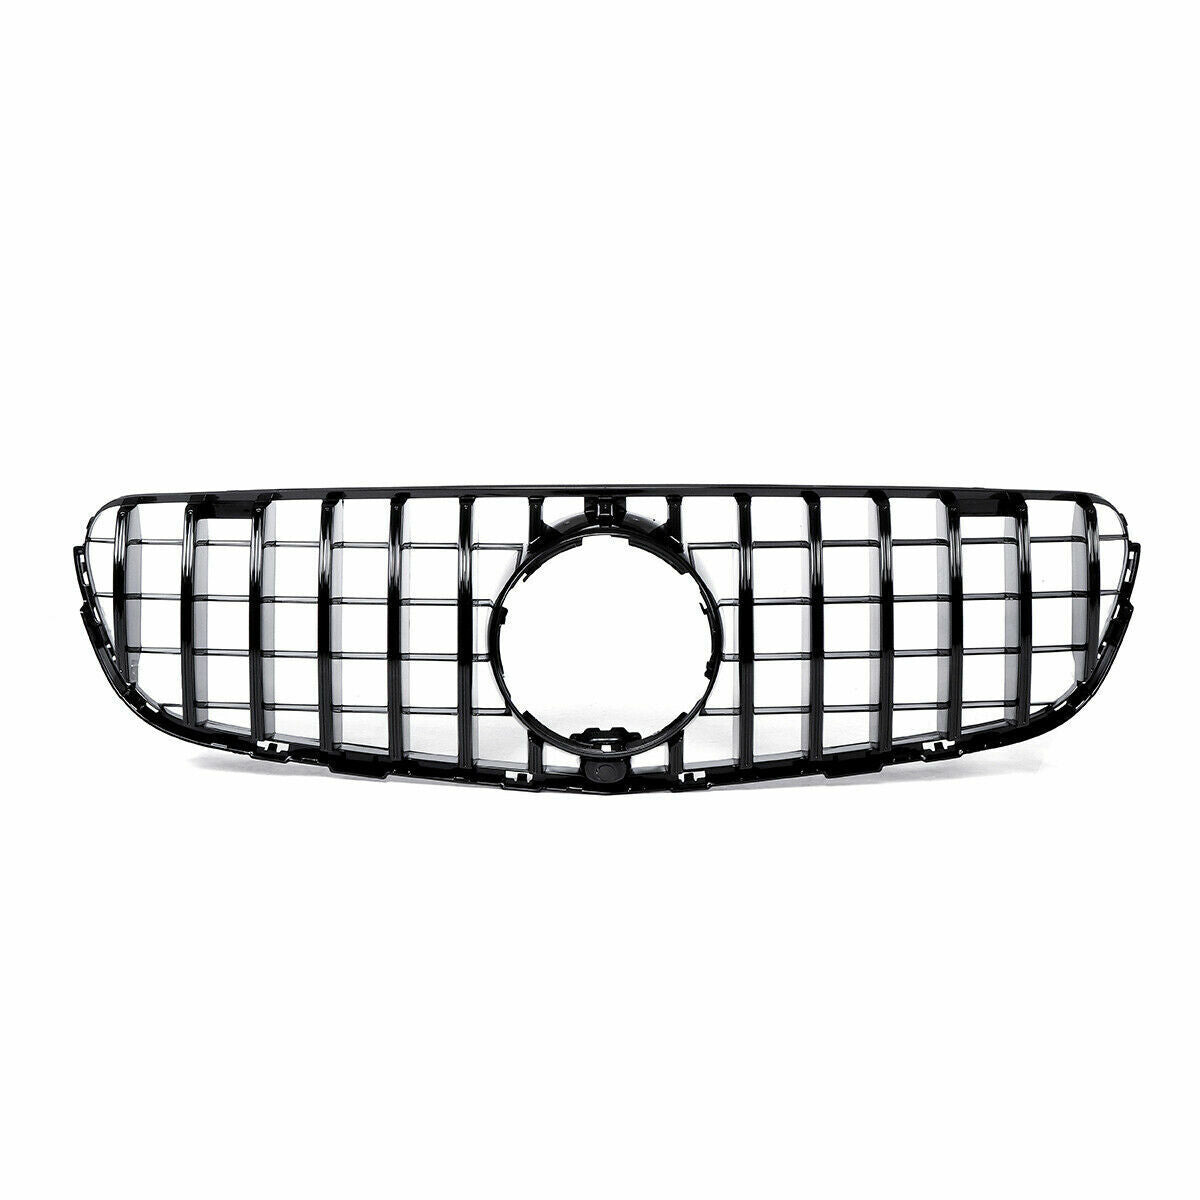 FOR MERCEDES GLC X253 C253 15-19 FRONT GRILLE PANAMERICANA GT STYLE GL